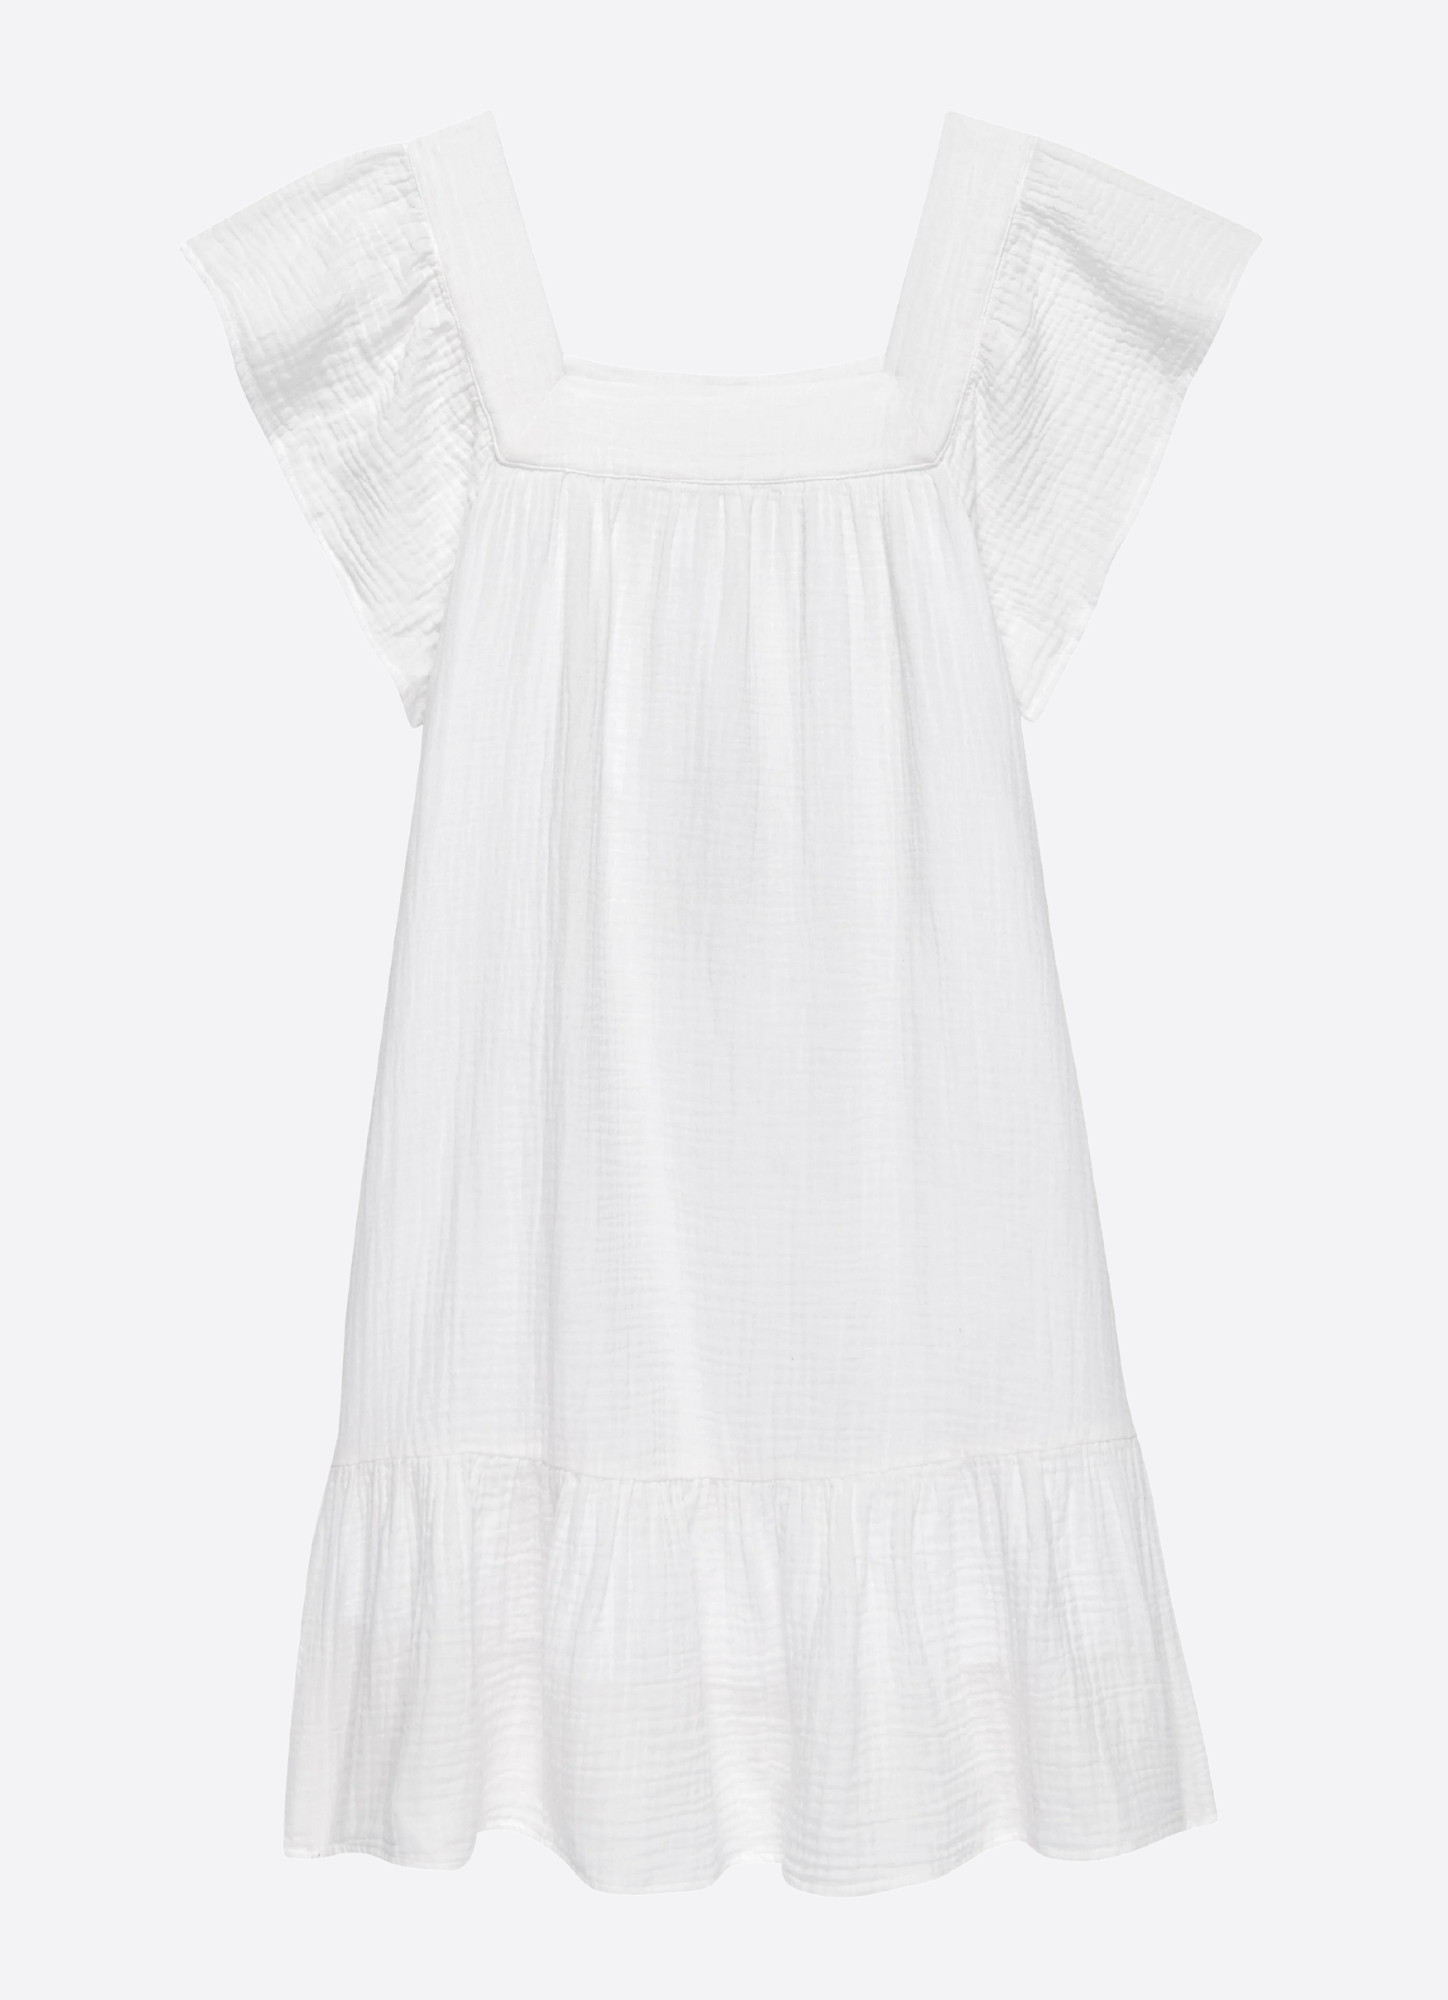 White cheesecloth dress with frill sleeve